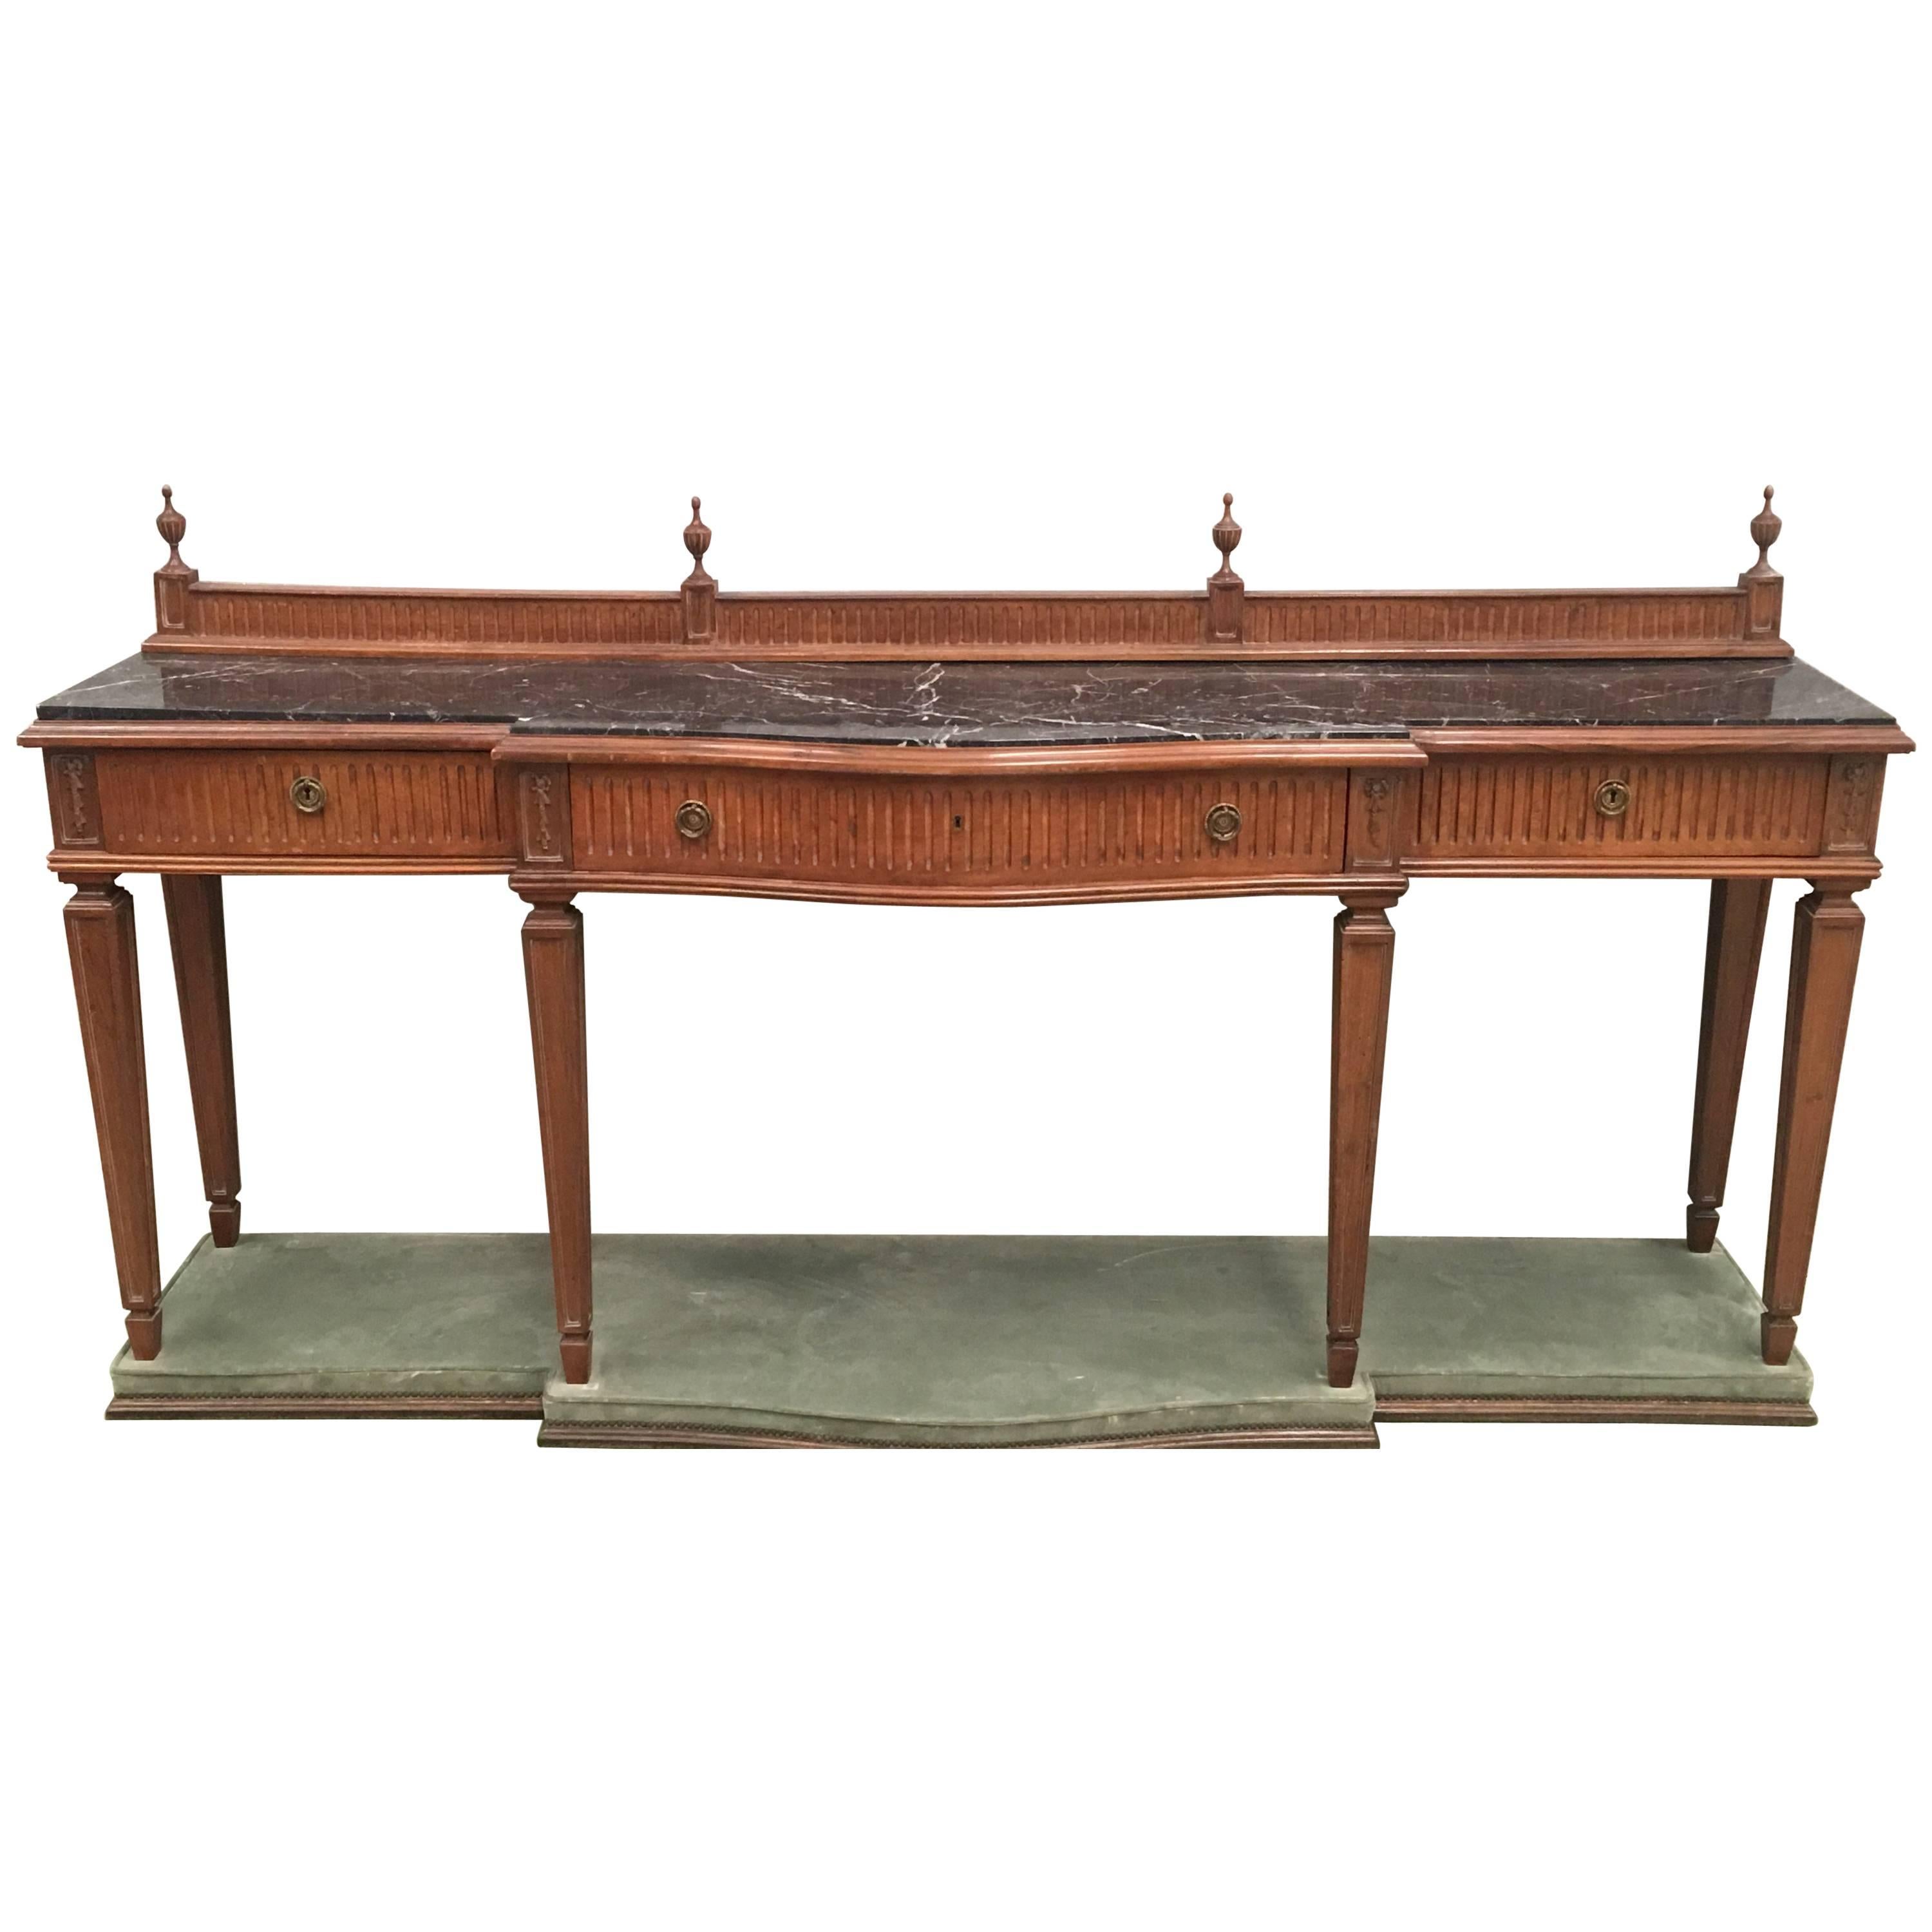 20th century Louis XVI Style Neoclassical Console Table with Three Drawers